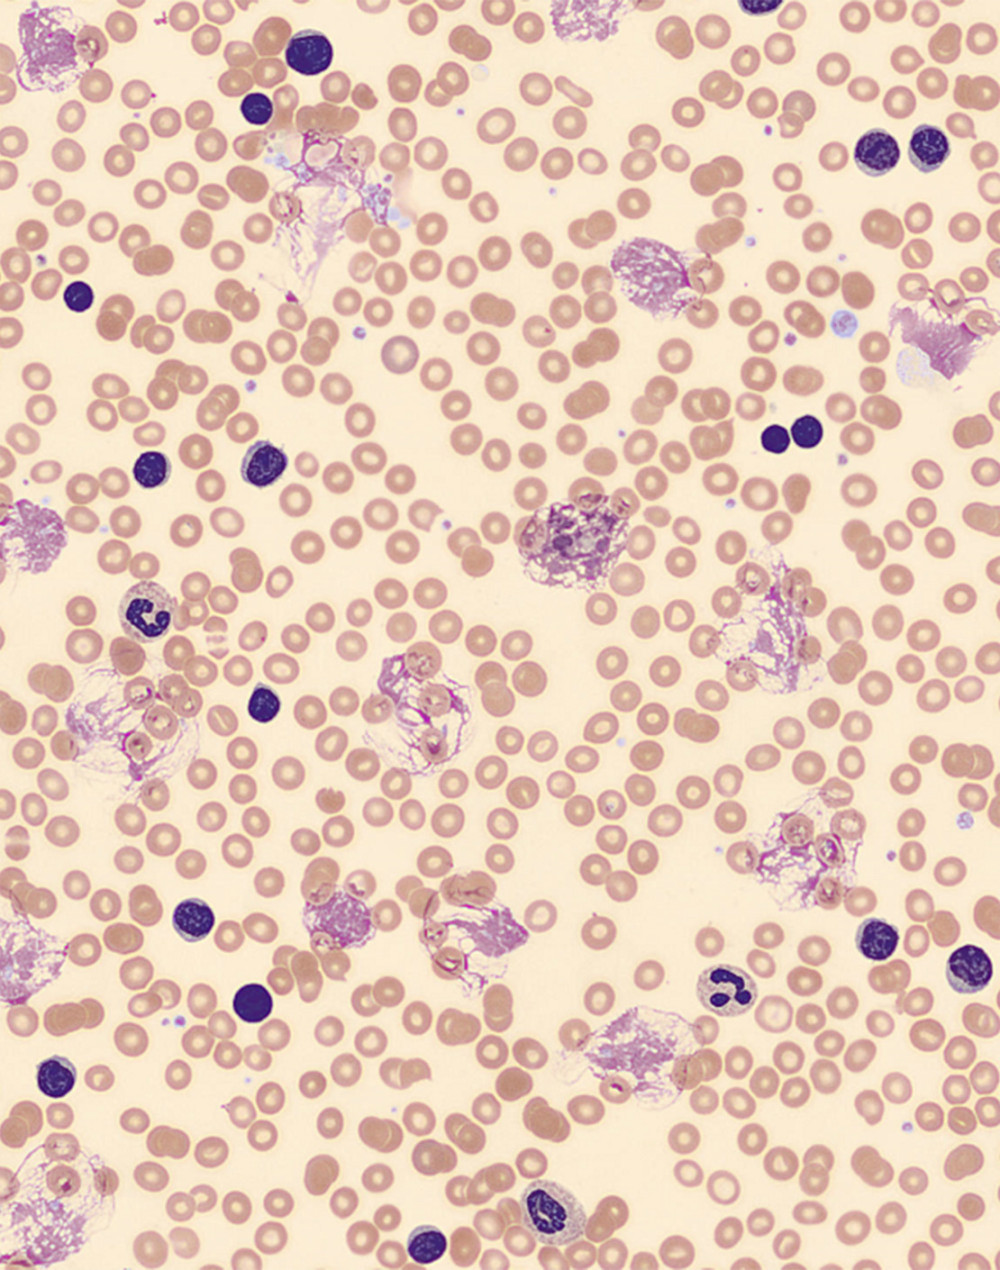 Hematoxylin & eosin-stained peripheral blood film showing many small and large lymphocytes, prolymphocytes, and smudge (CLL) cells.